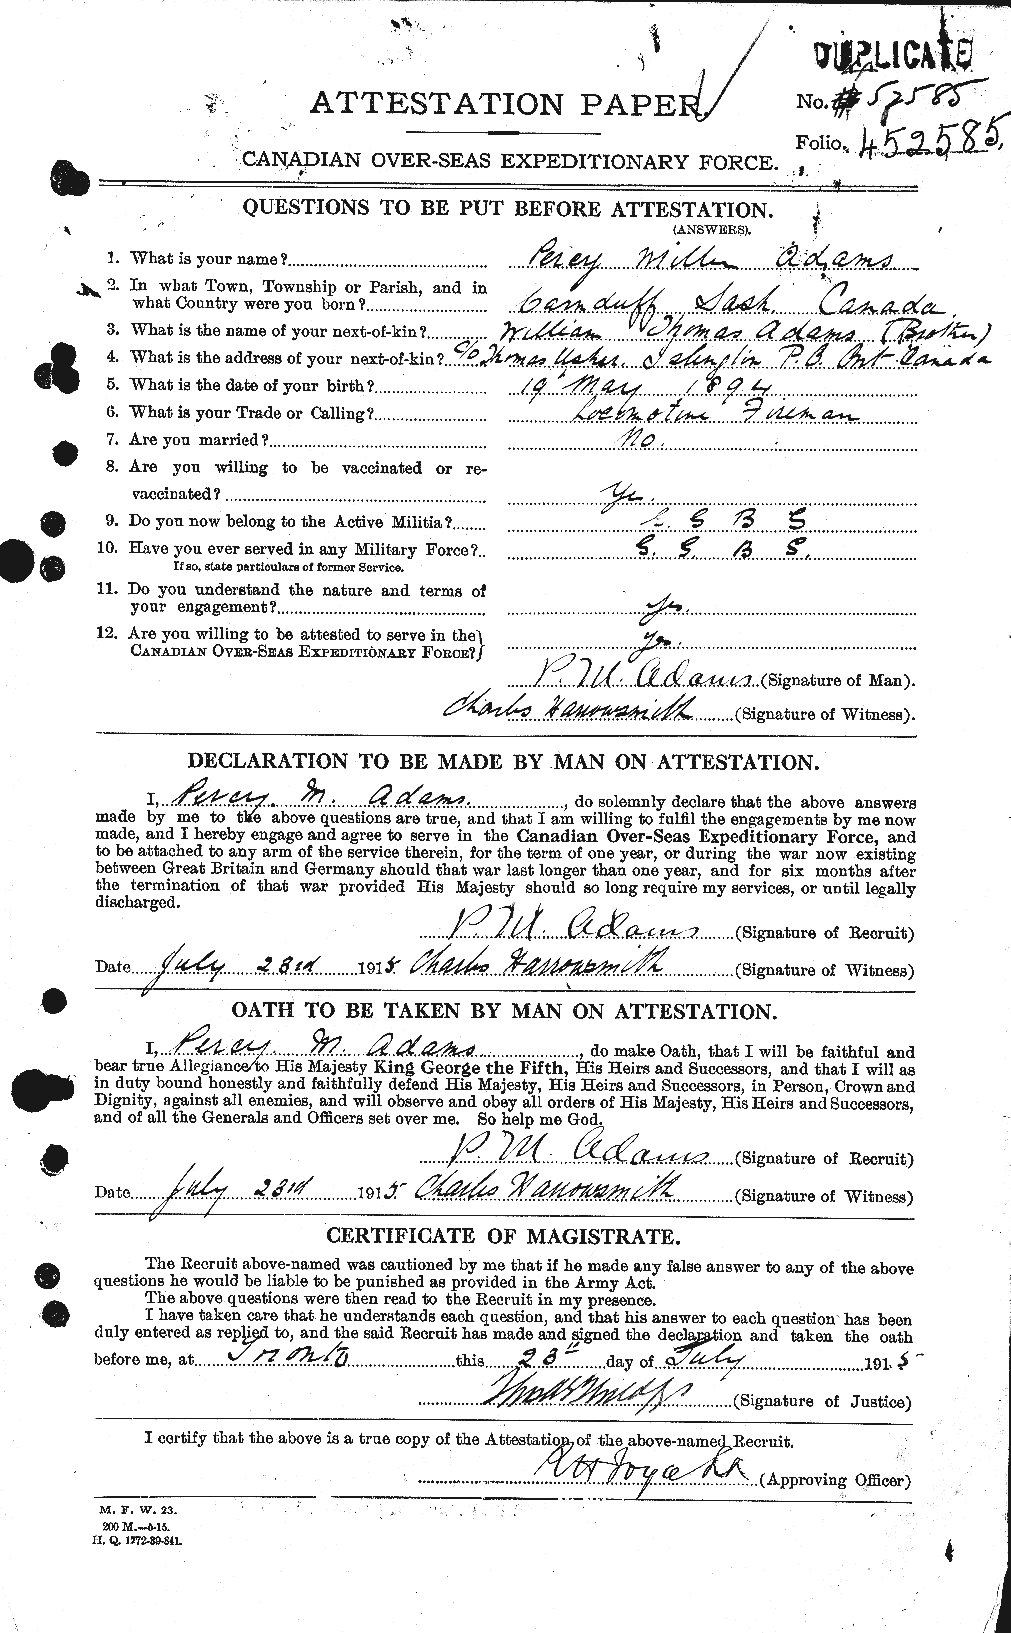 Personnel Records of the First World War - CEF 202001a